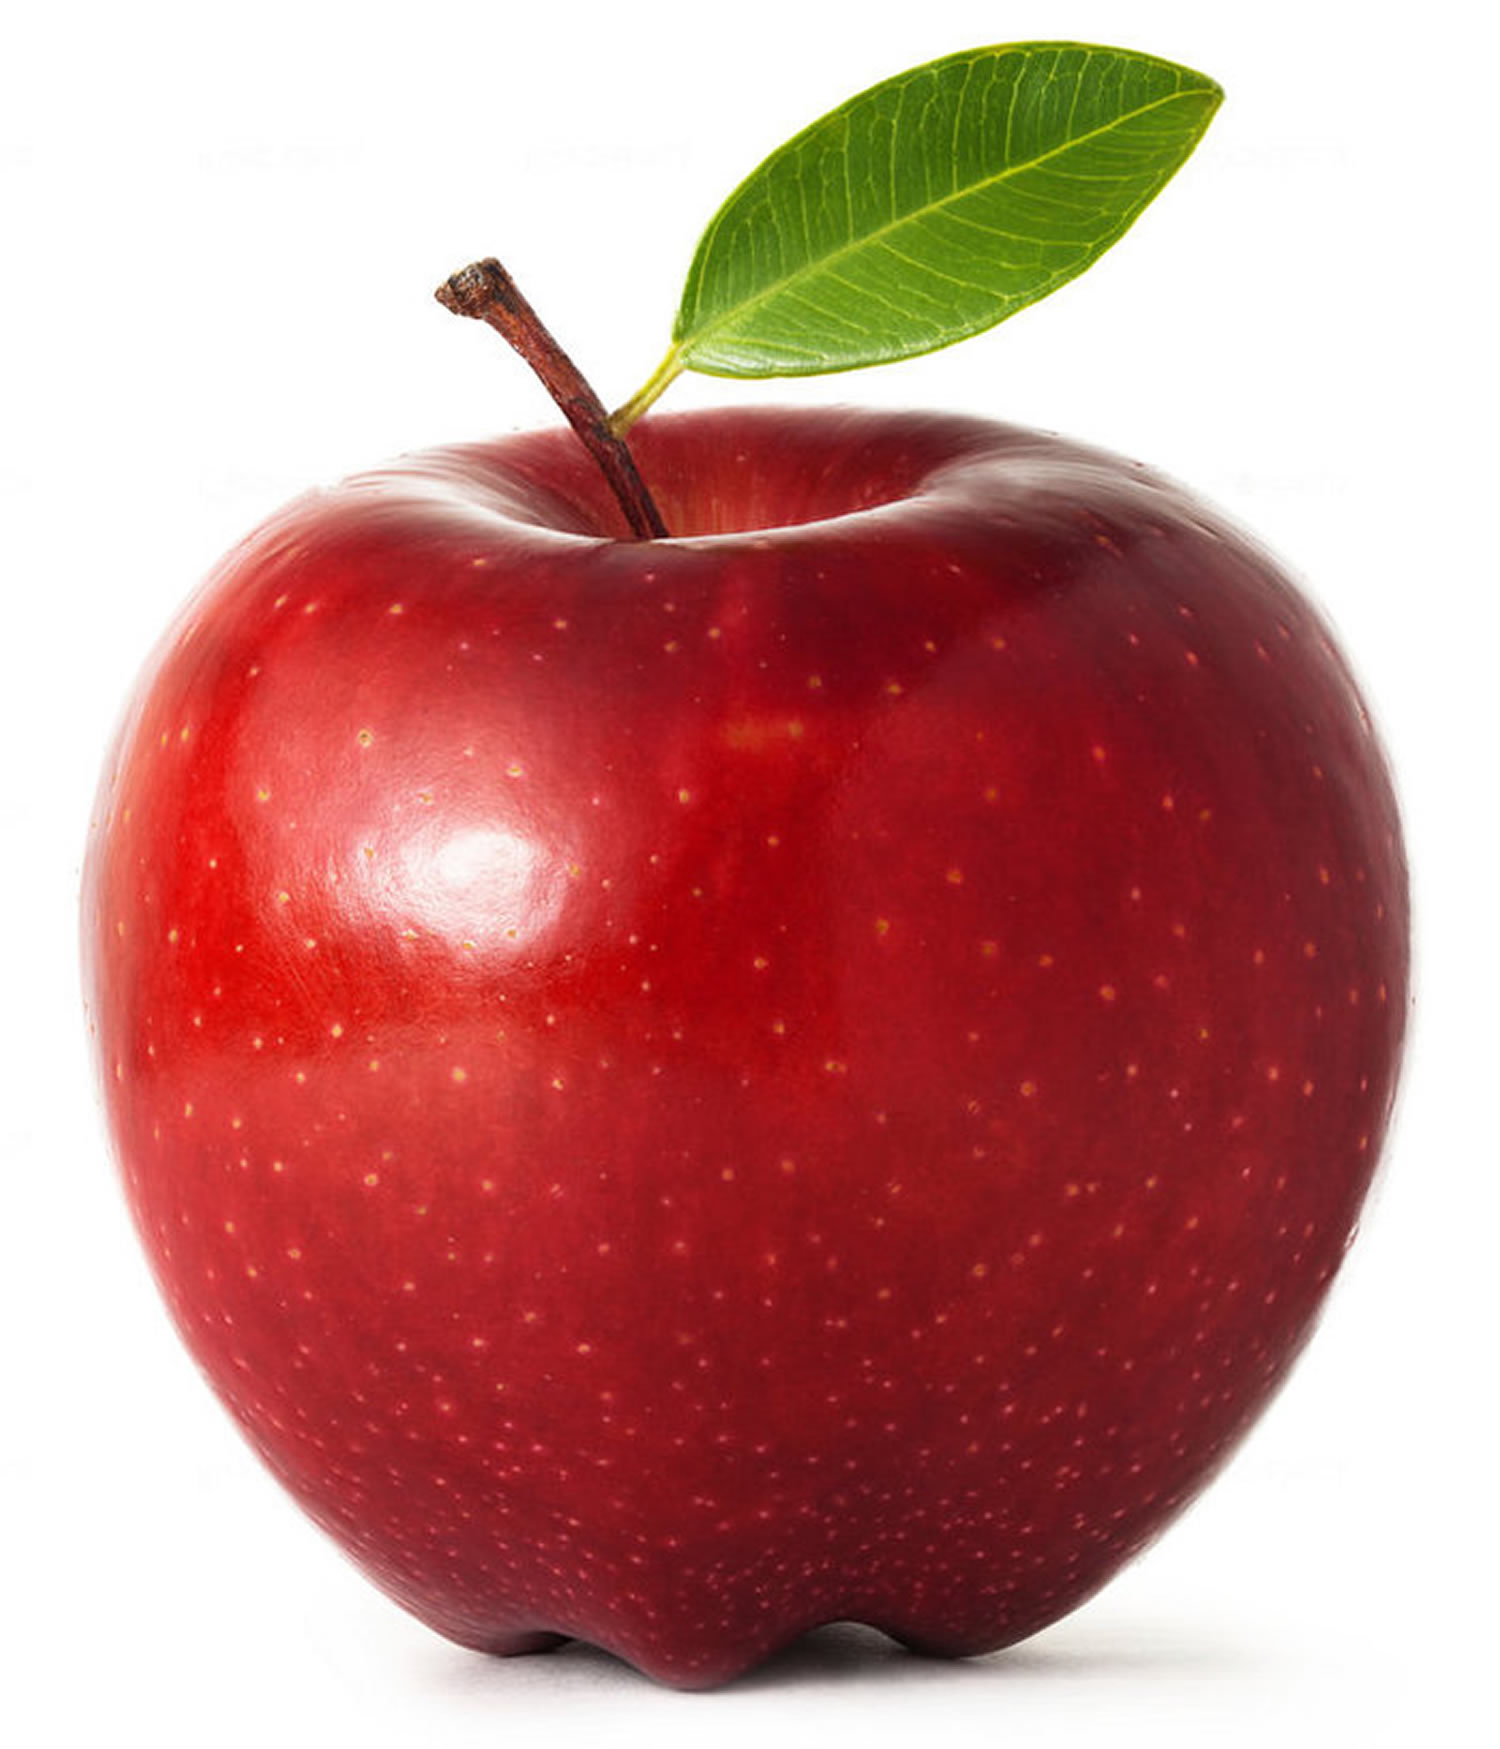 Picture Of An Apple Fruit